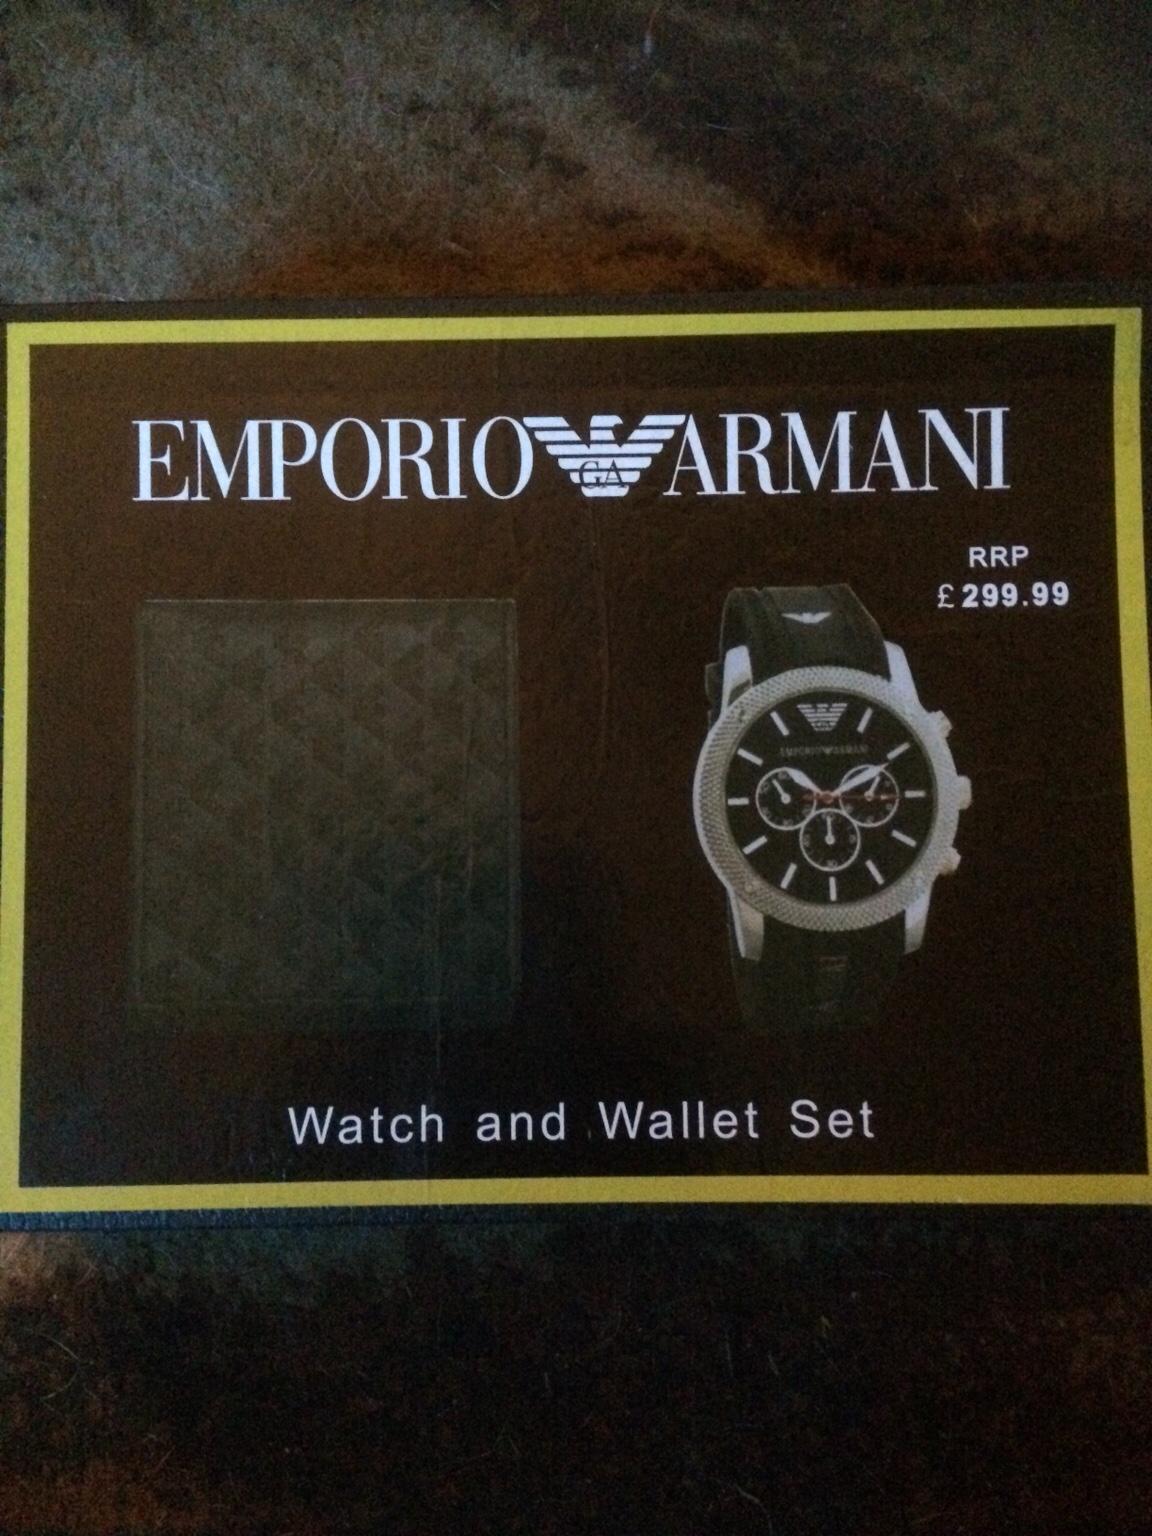 EMPORIO ARMANI WATCH AND WALLET SET in 